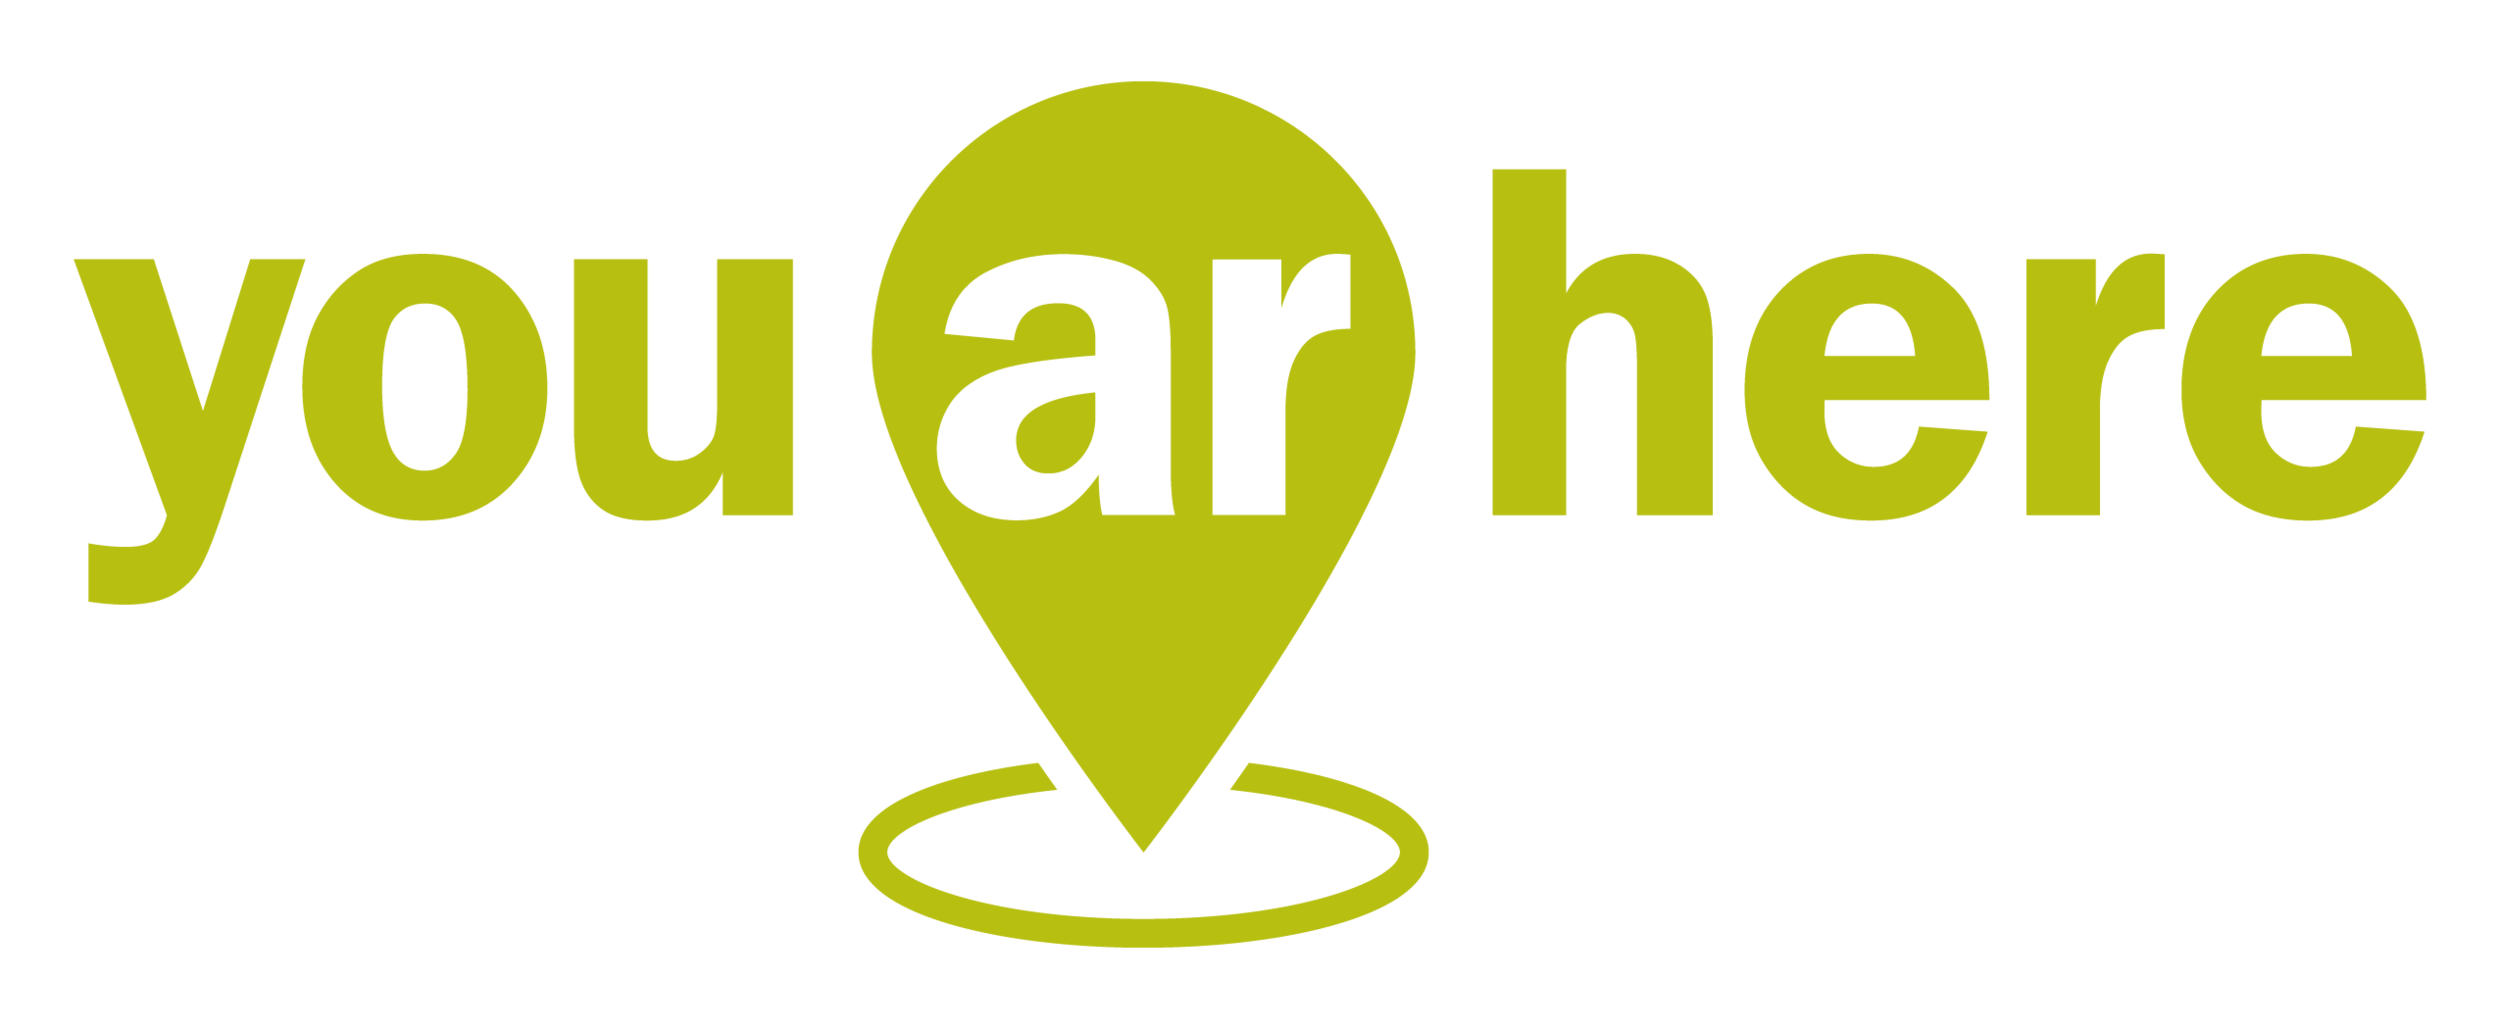    youARhere   is an augmented reality app created by students at the University of Georgia to exemplify historical environment changes.  